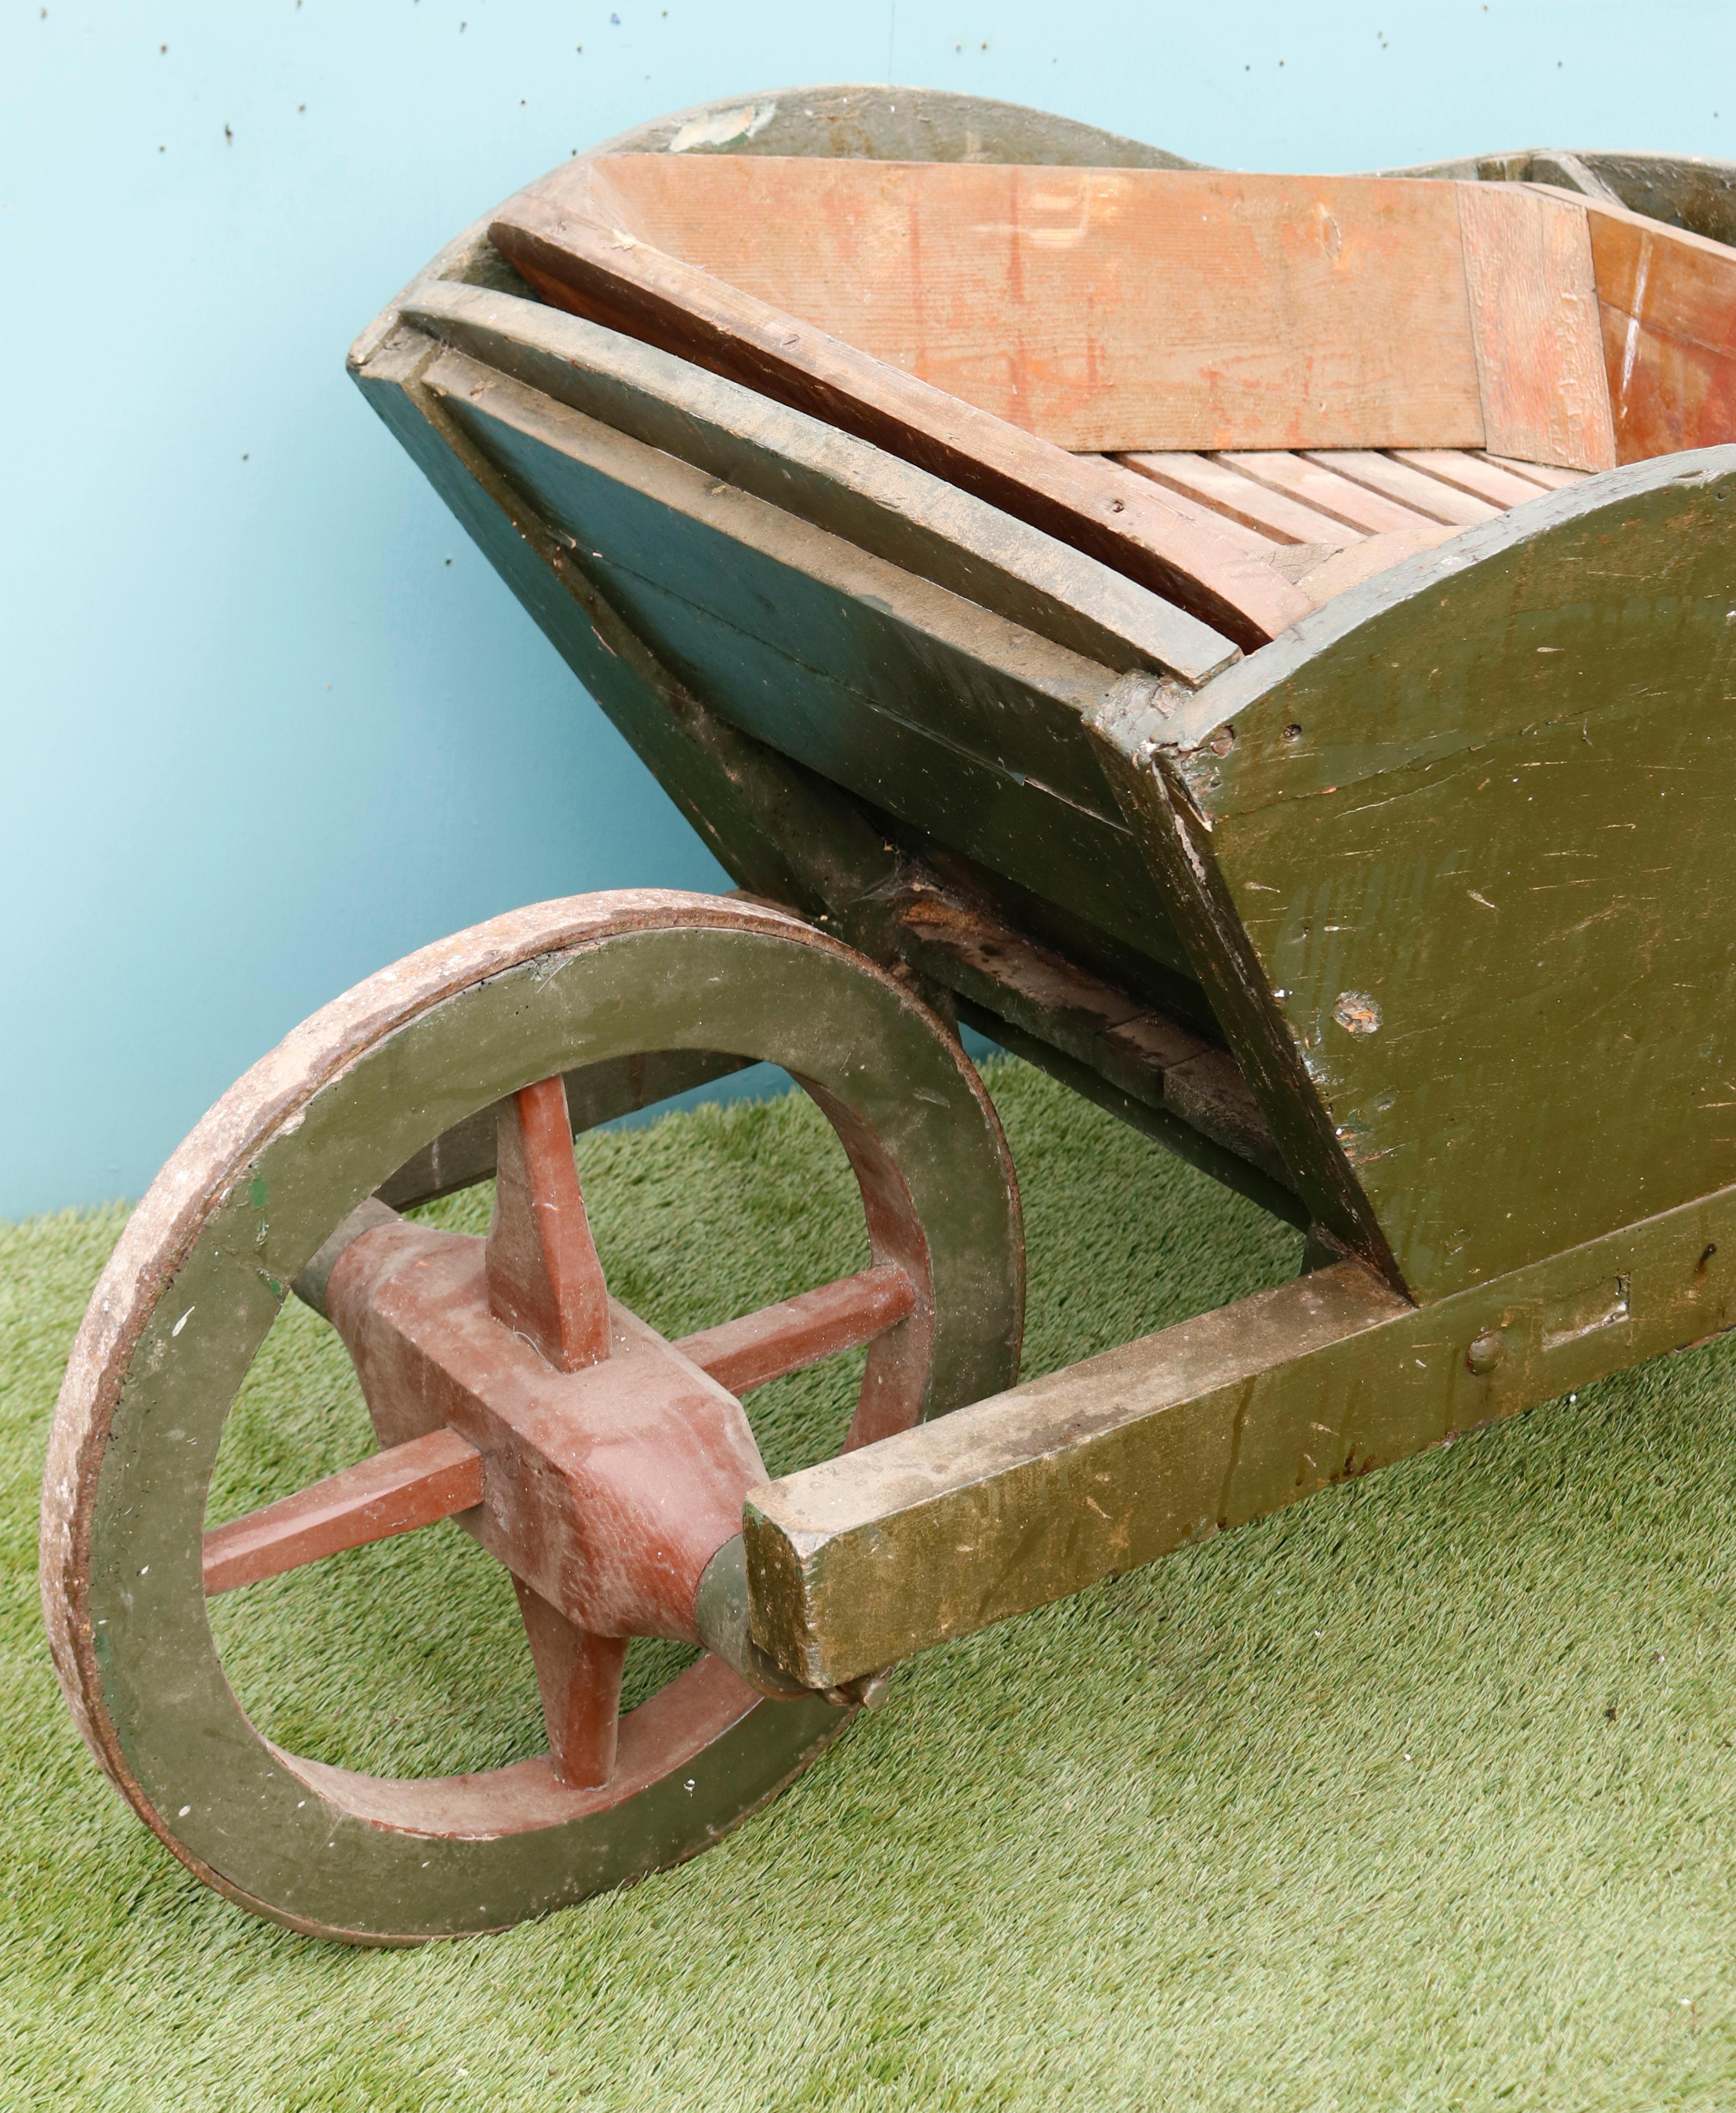 An antique painted timber wheelbarrow. Later adapted with a tray for carrying apples.